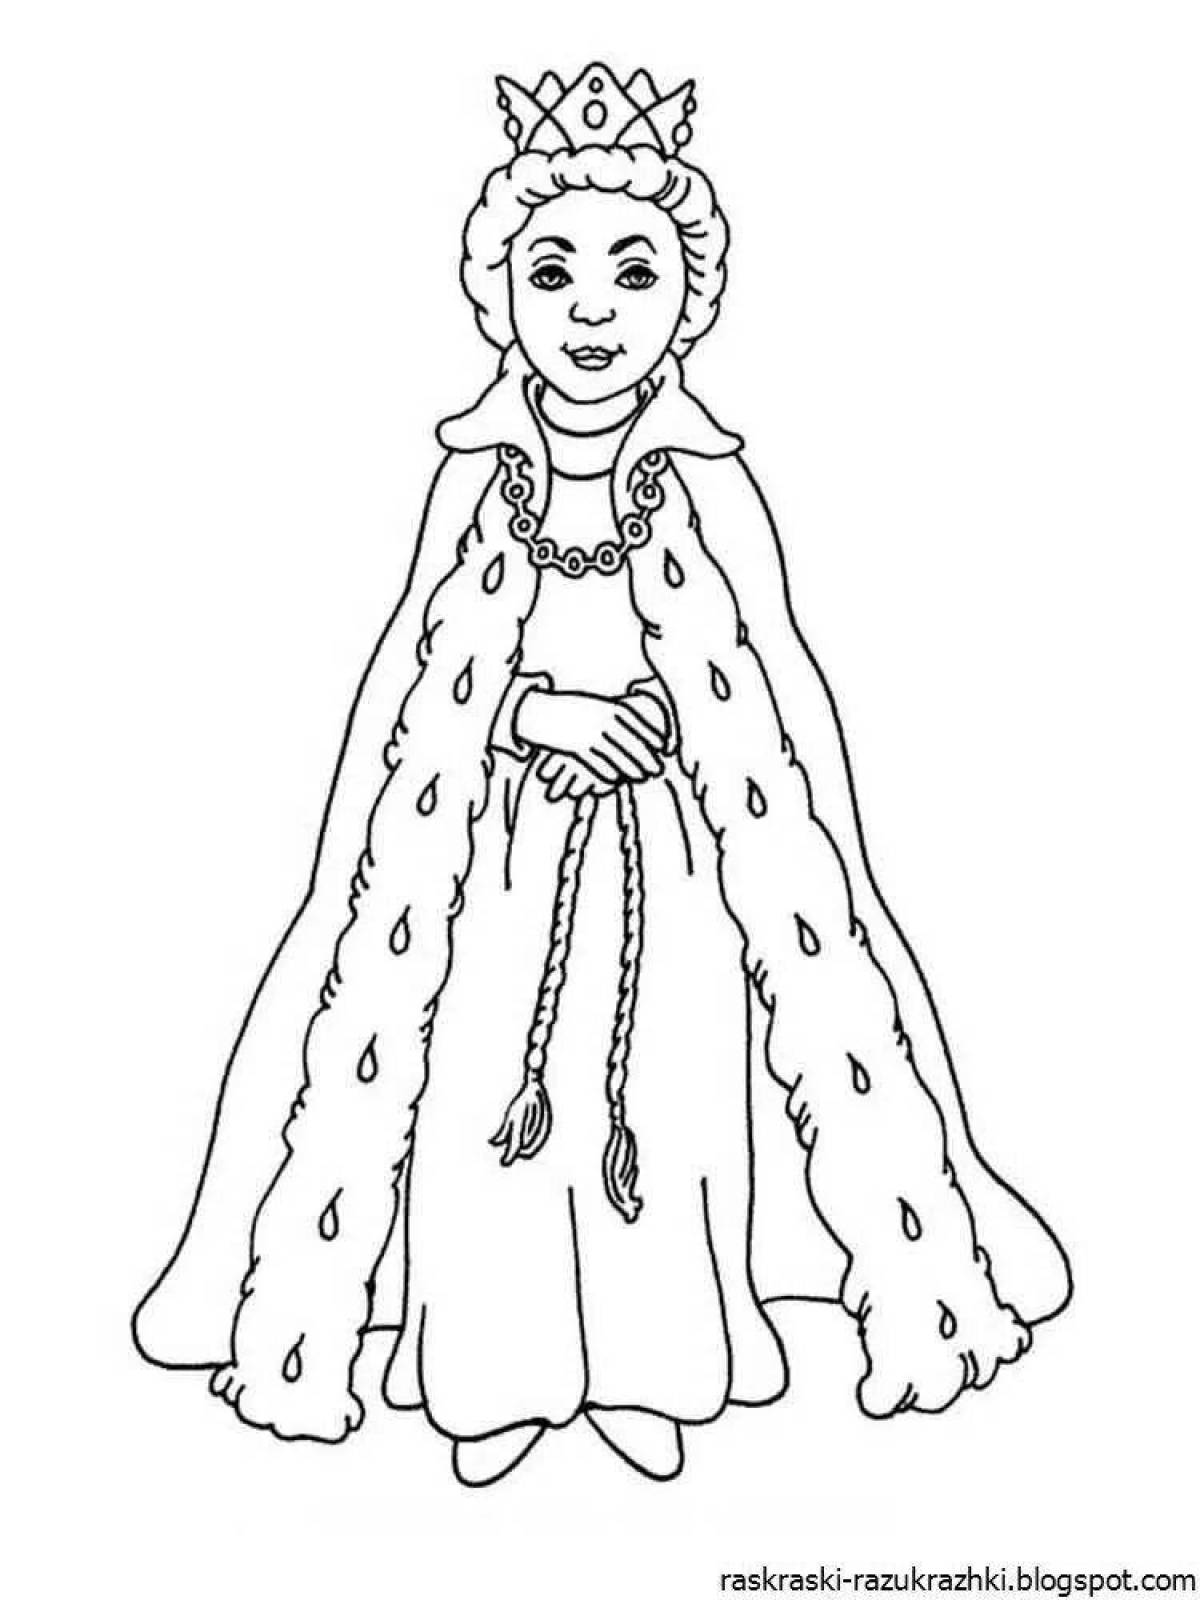 Exquisite queen coloring book for kids